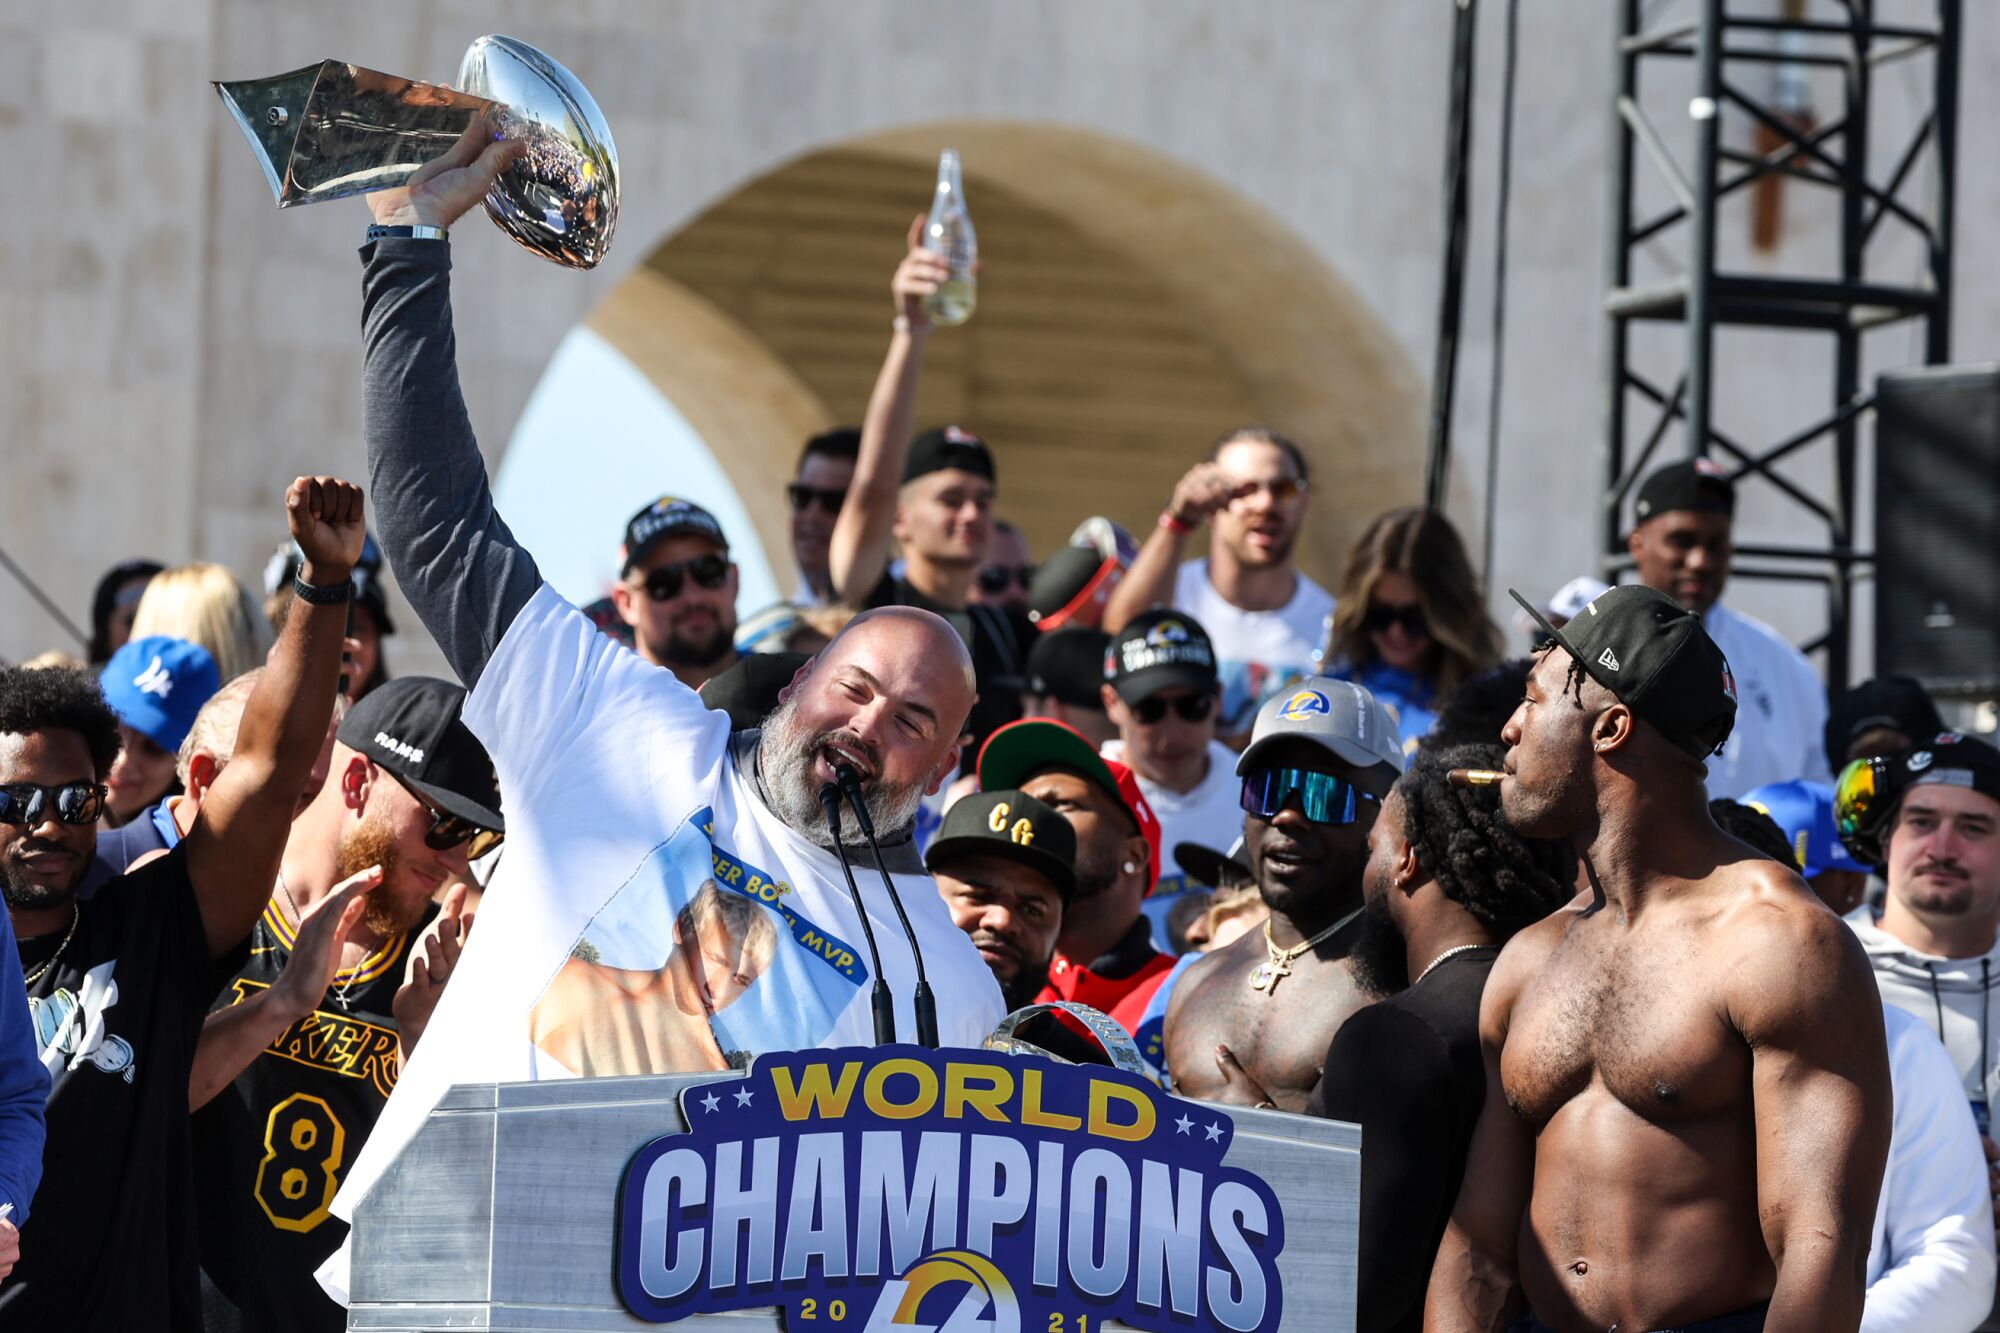 Andrew Whitworth hoists the Lombardi Trophy while Rams teammates cheer at the Super Bowl LVI celebration at LA Coliseum.